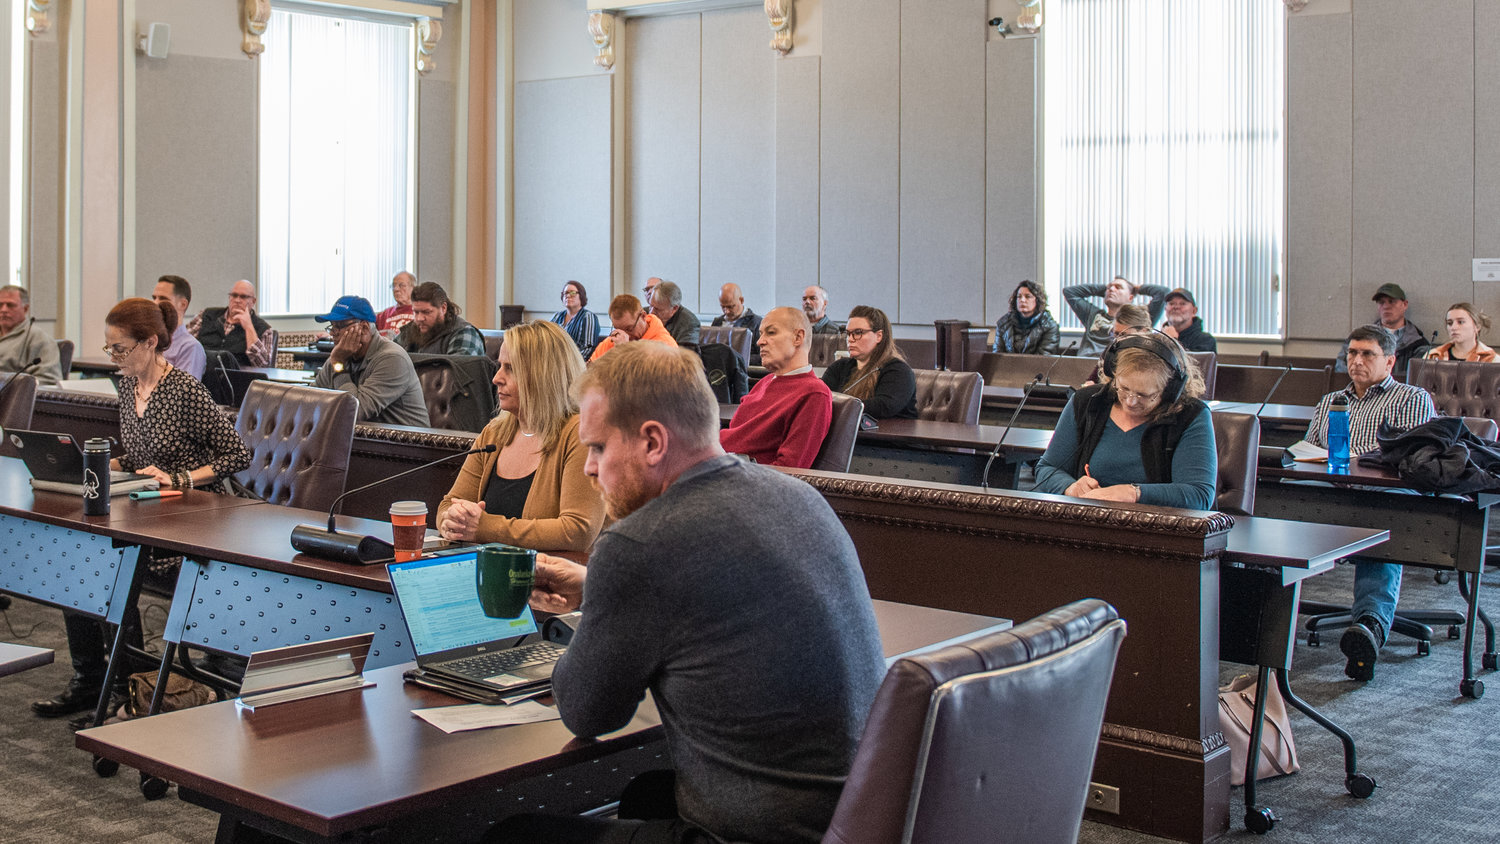 The Lewis County Courthouse Commissioners’ Hearing Room is filled with citizens and county staff on Tuesday morning as the county votes on changes to its comprehensive plan.